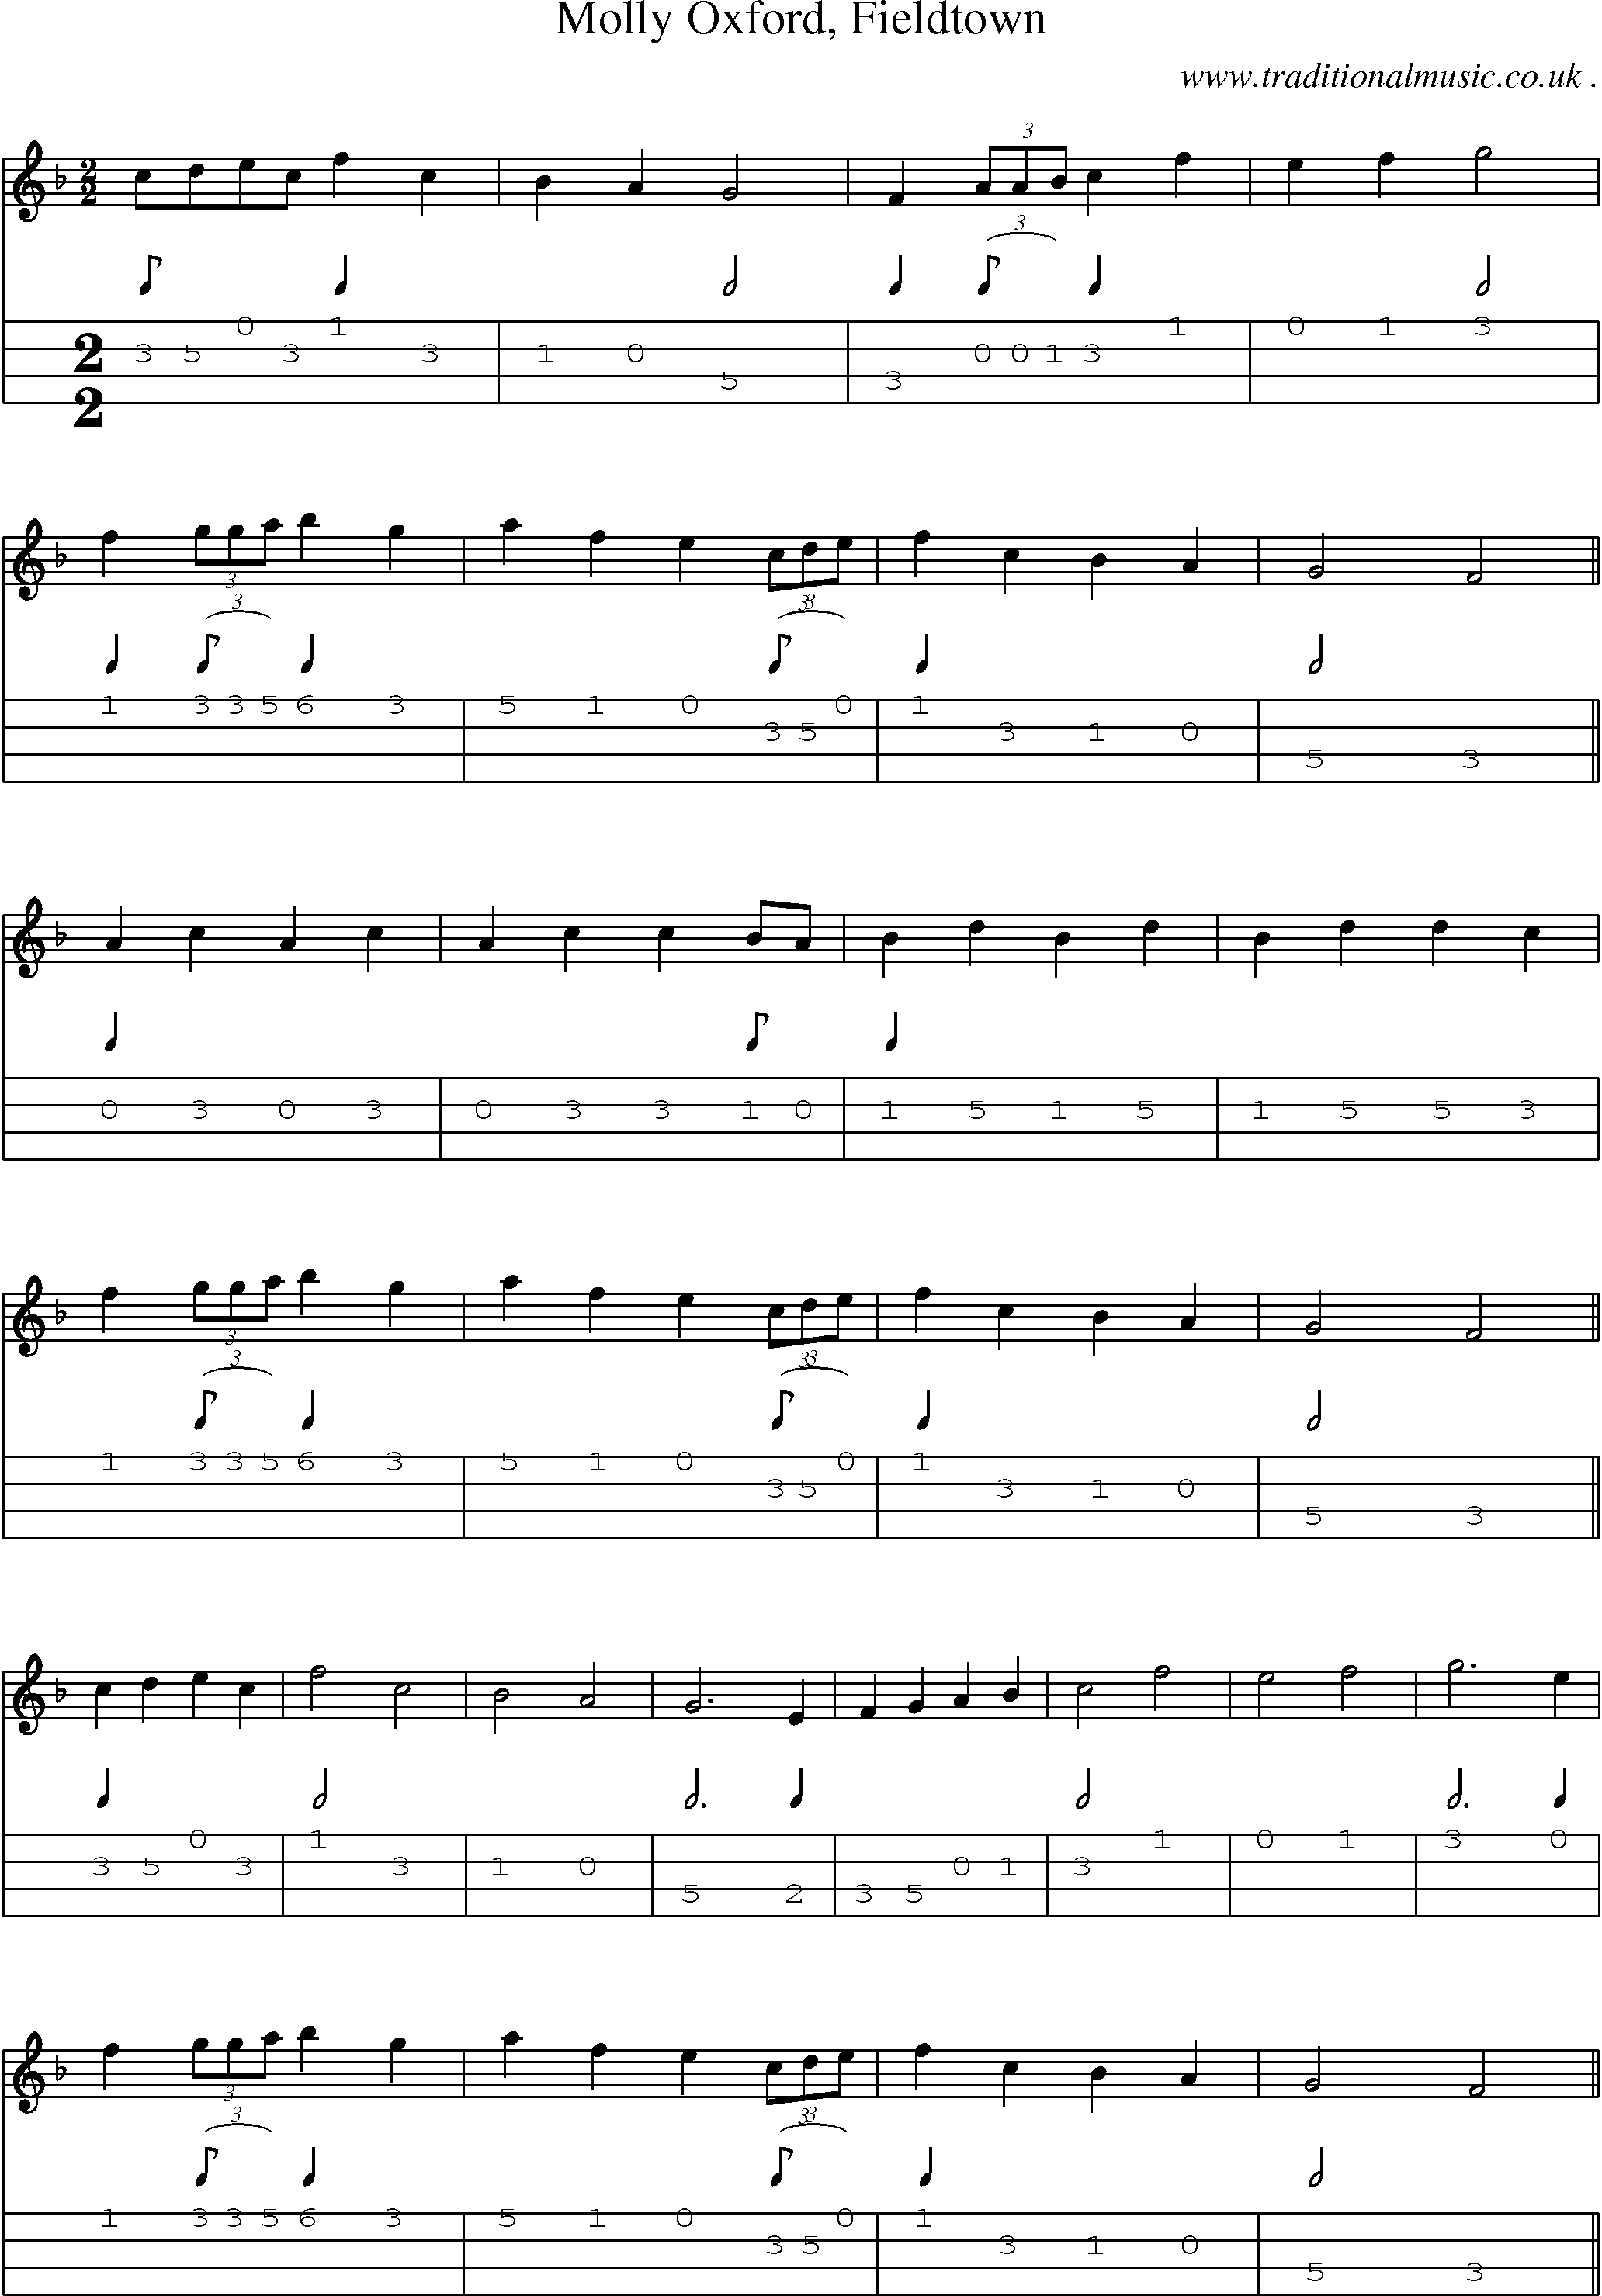 Sheet-Music and Mandolin Tabs for Molly Oxford Fieldtown